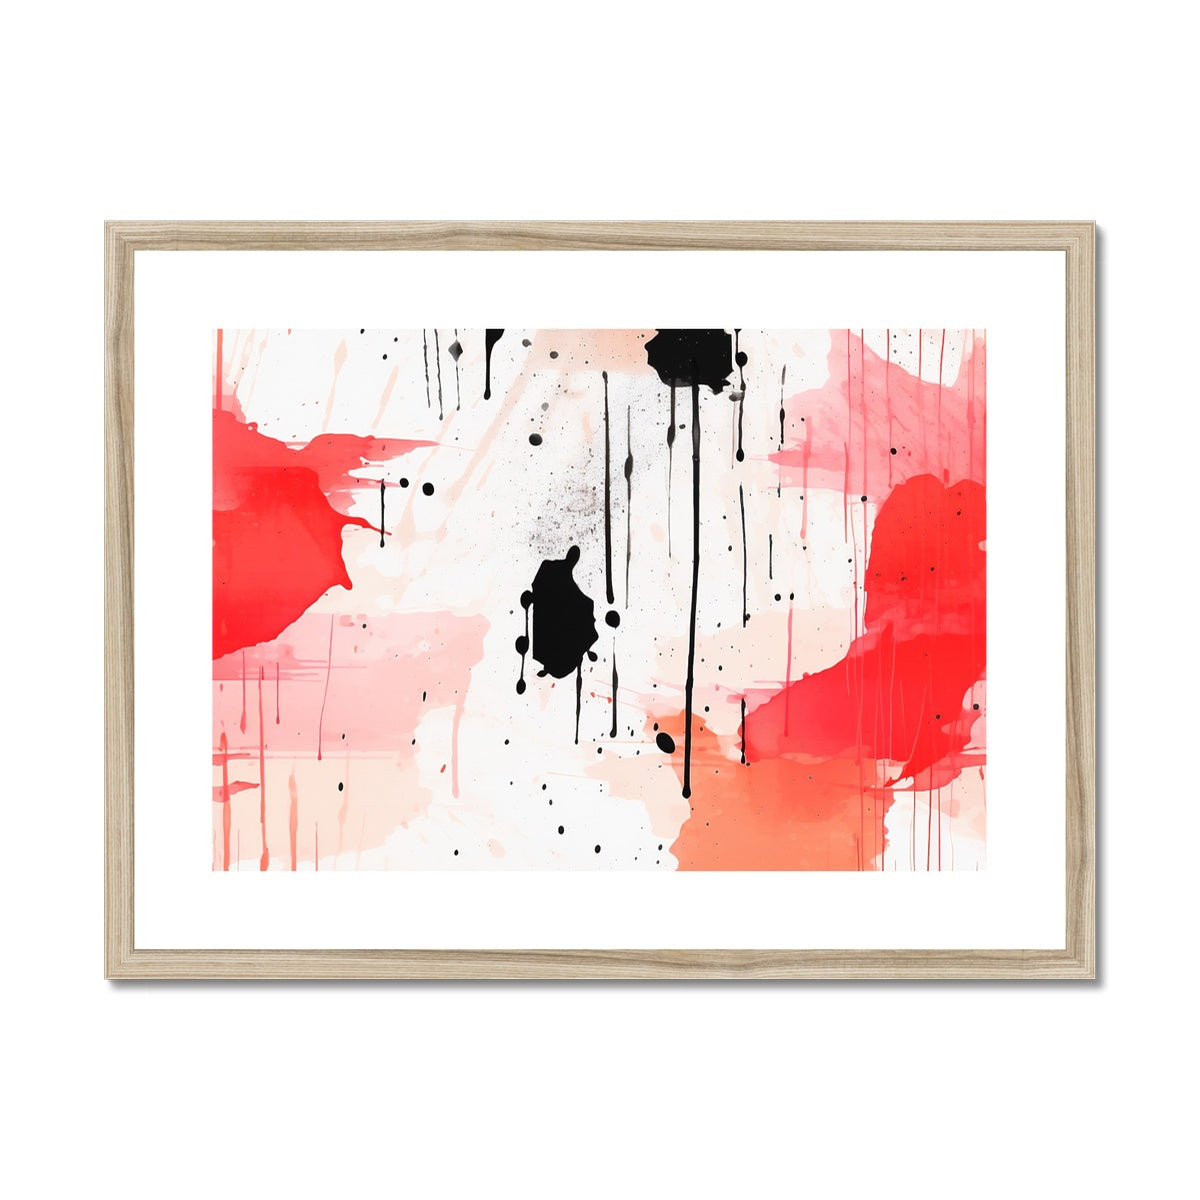 Mounted Majesty: Red Splasher in a Frame!